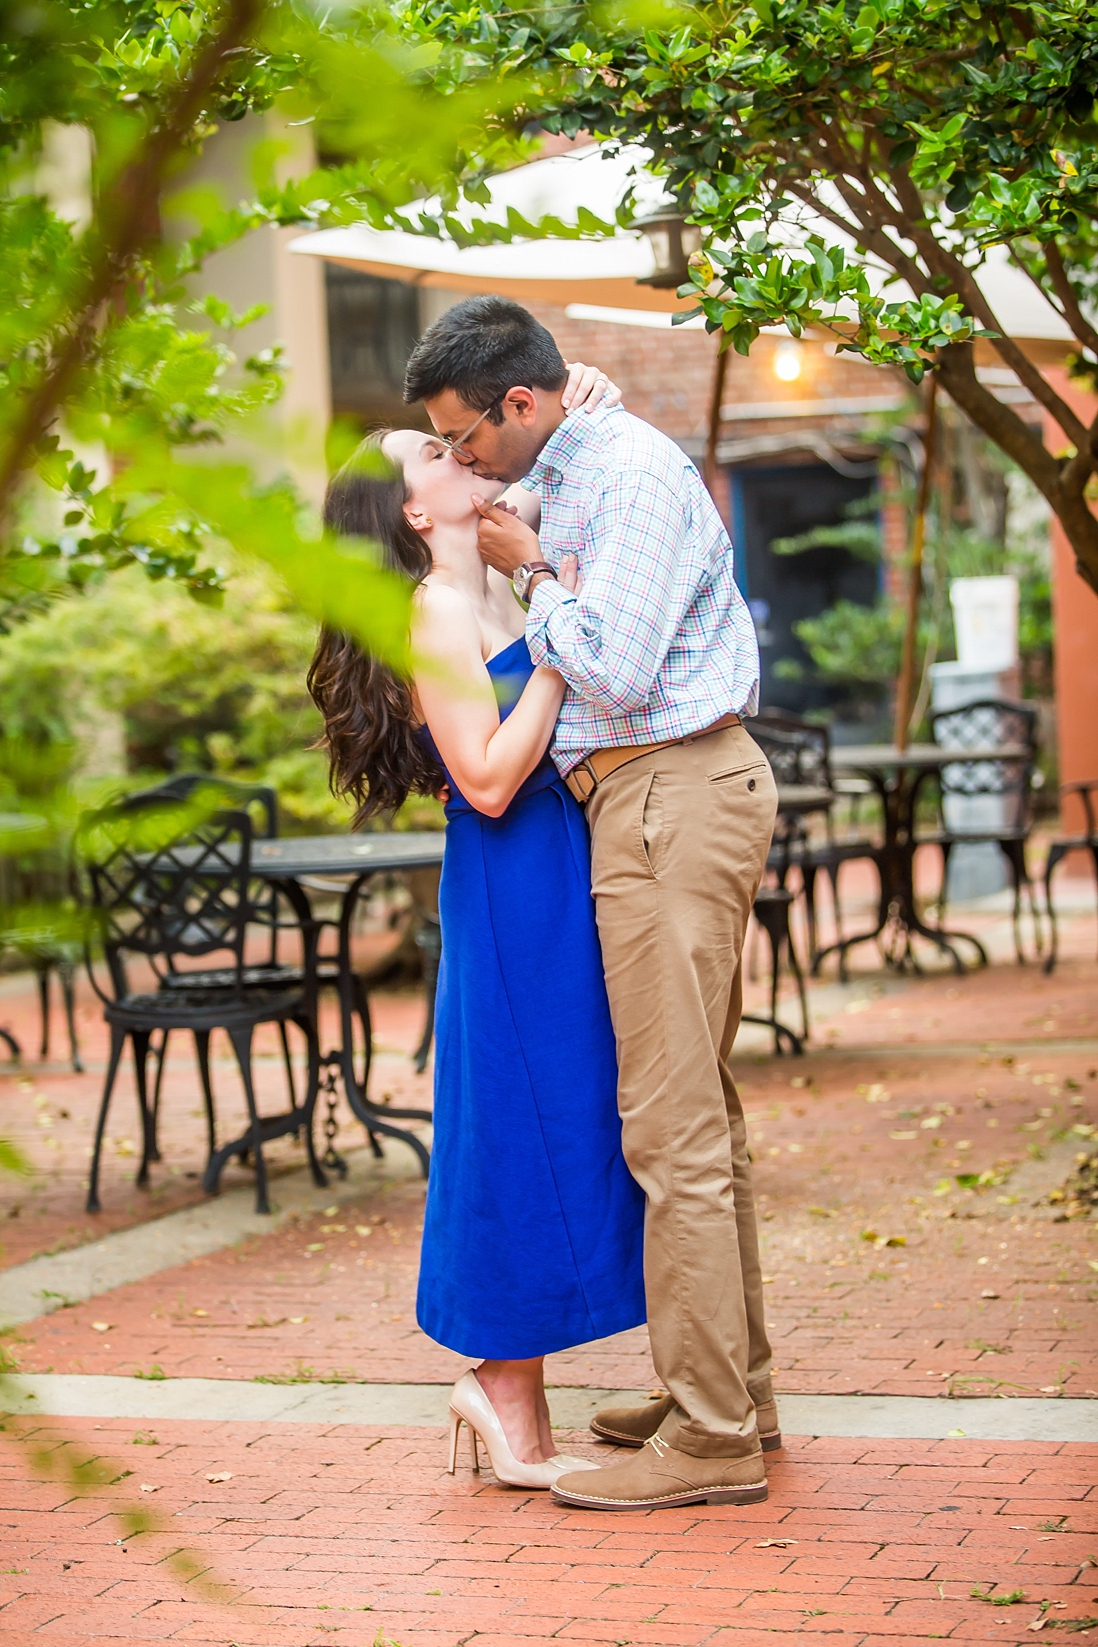 Downtown Tallahassee Engagement Session at Governor's Inn